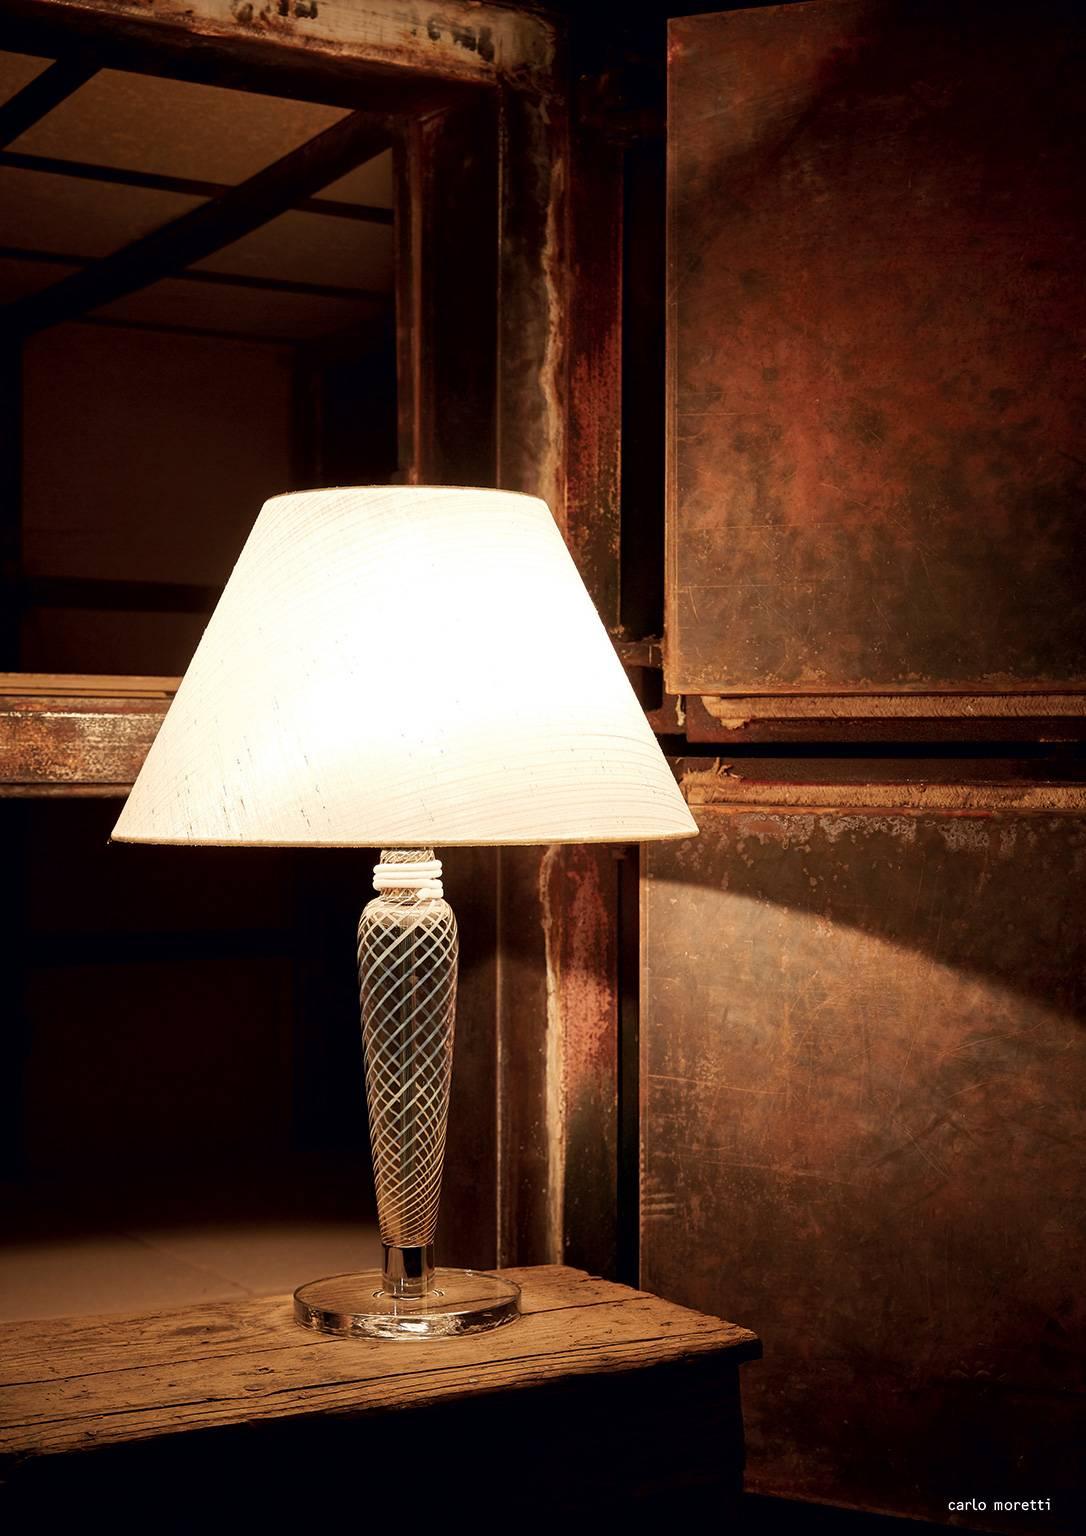 Table lamp with Murano glass column, grey/white spiral transparent glass base, a truncated cone-shaped fabric shade, and metal fixtures in polished chrome. The lamp was designed by Carlo Moretti in 1995.


Carlo Moretti: An artisan